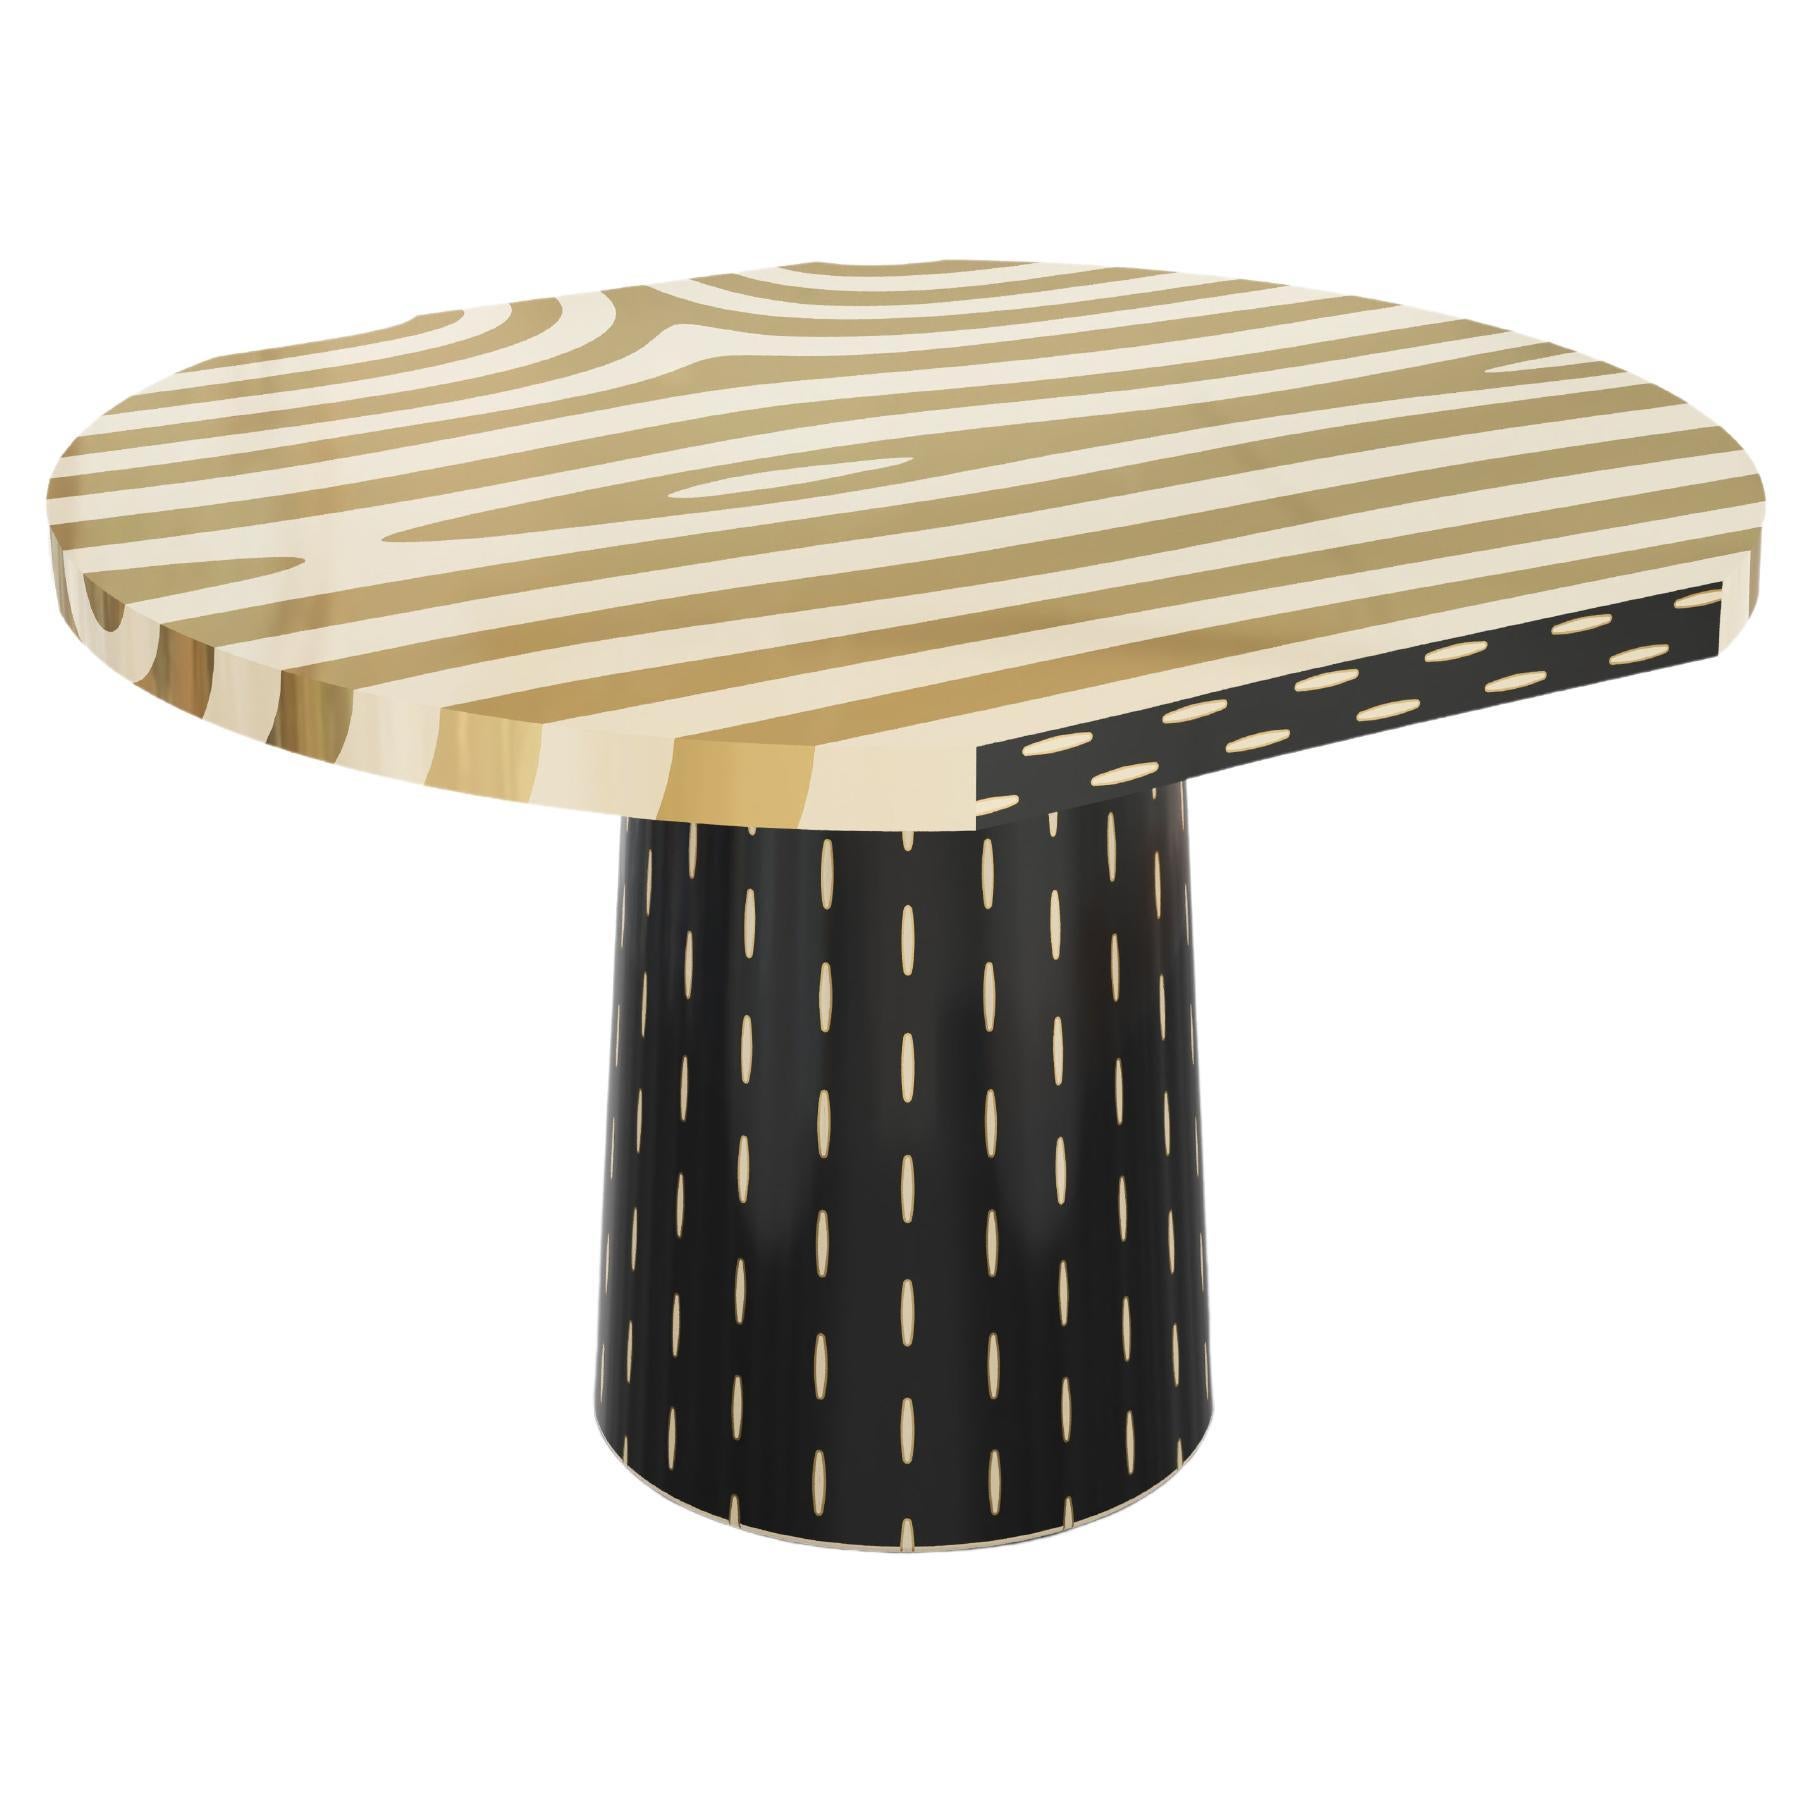 Forest Round Dining Table with Brass Inlay by Marcantonio